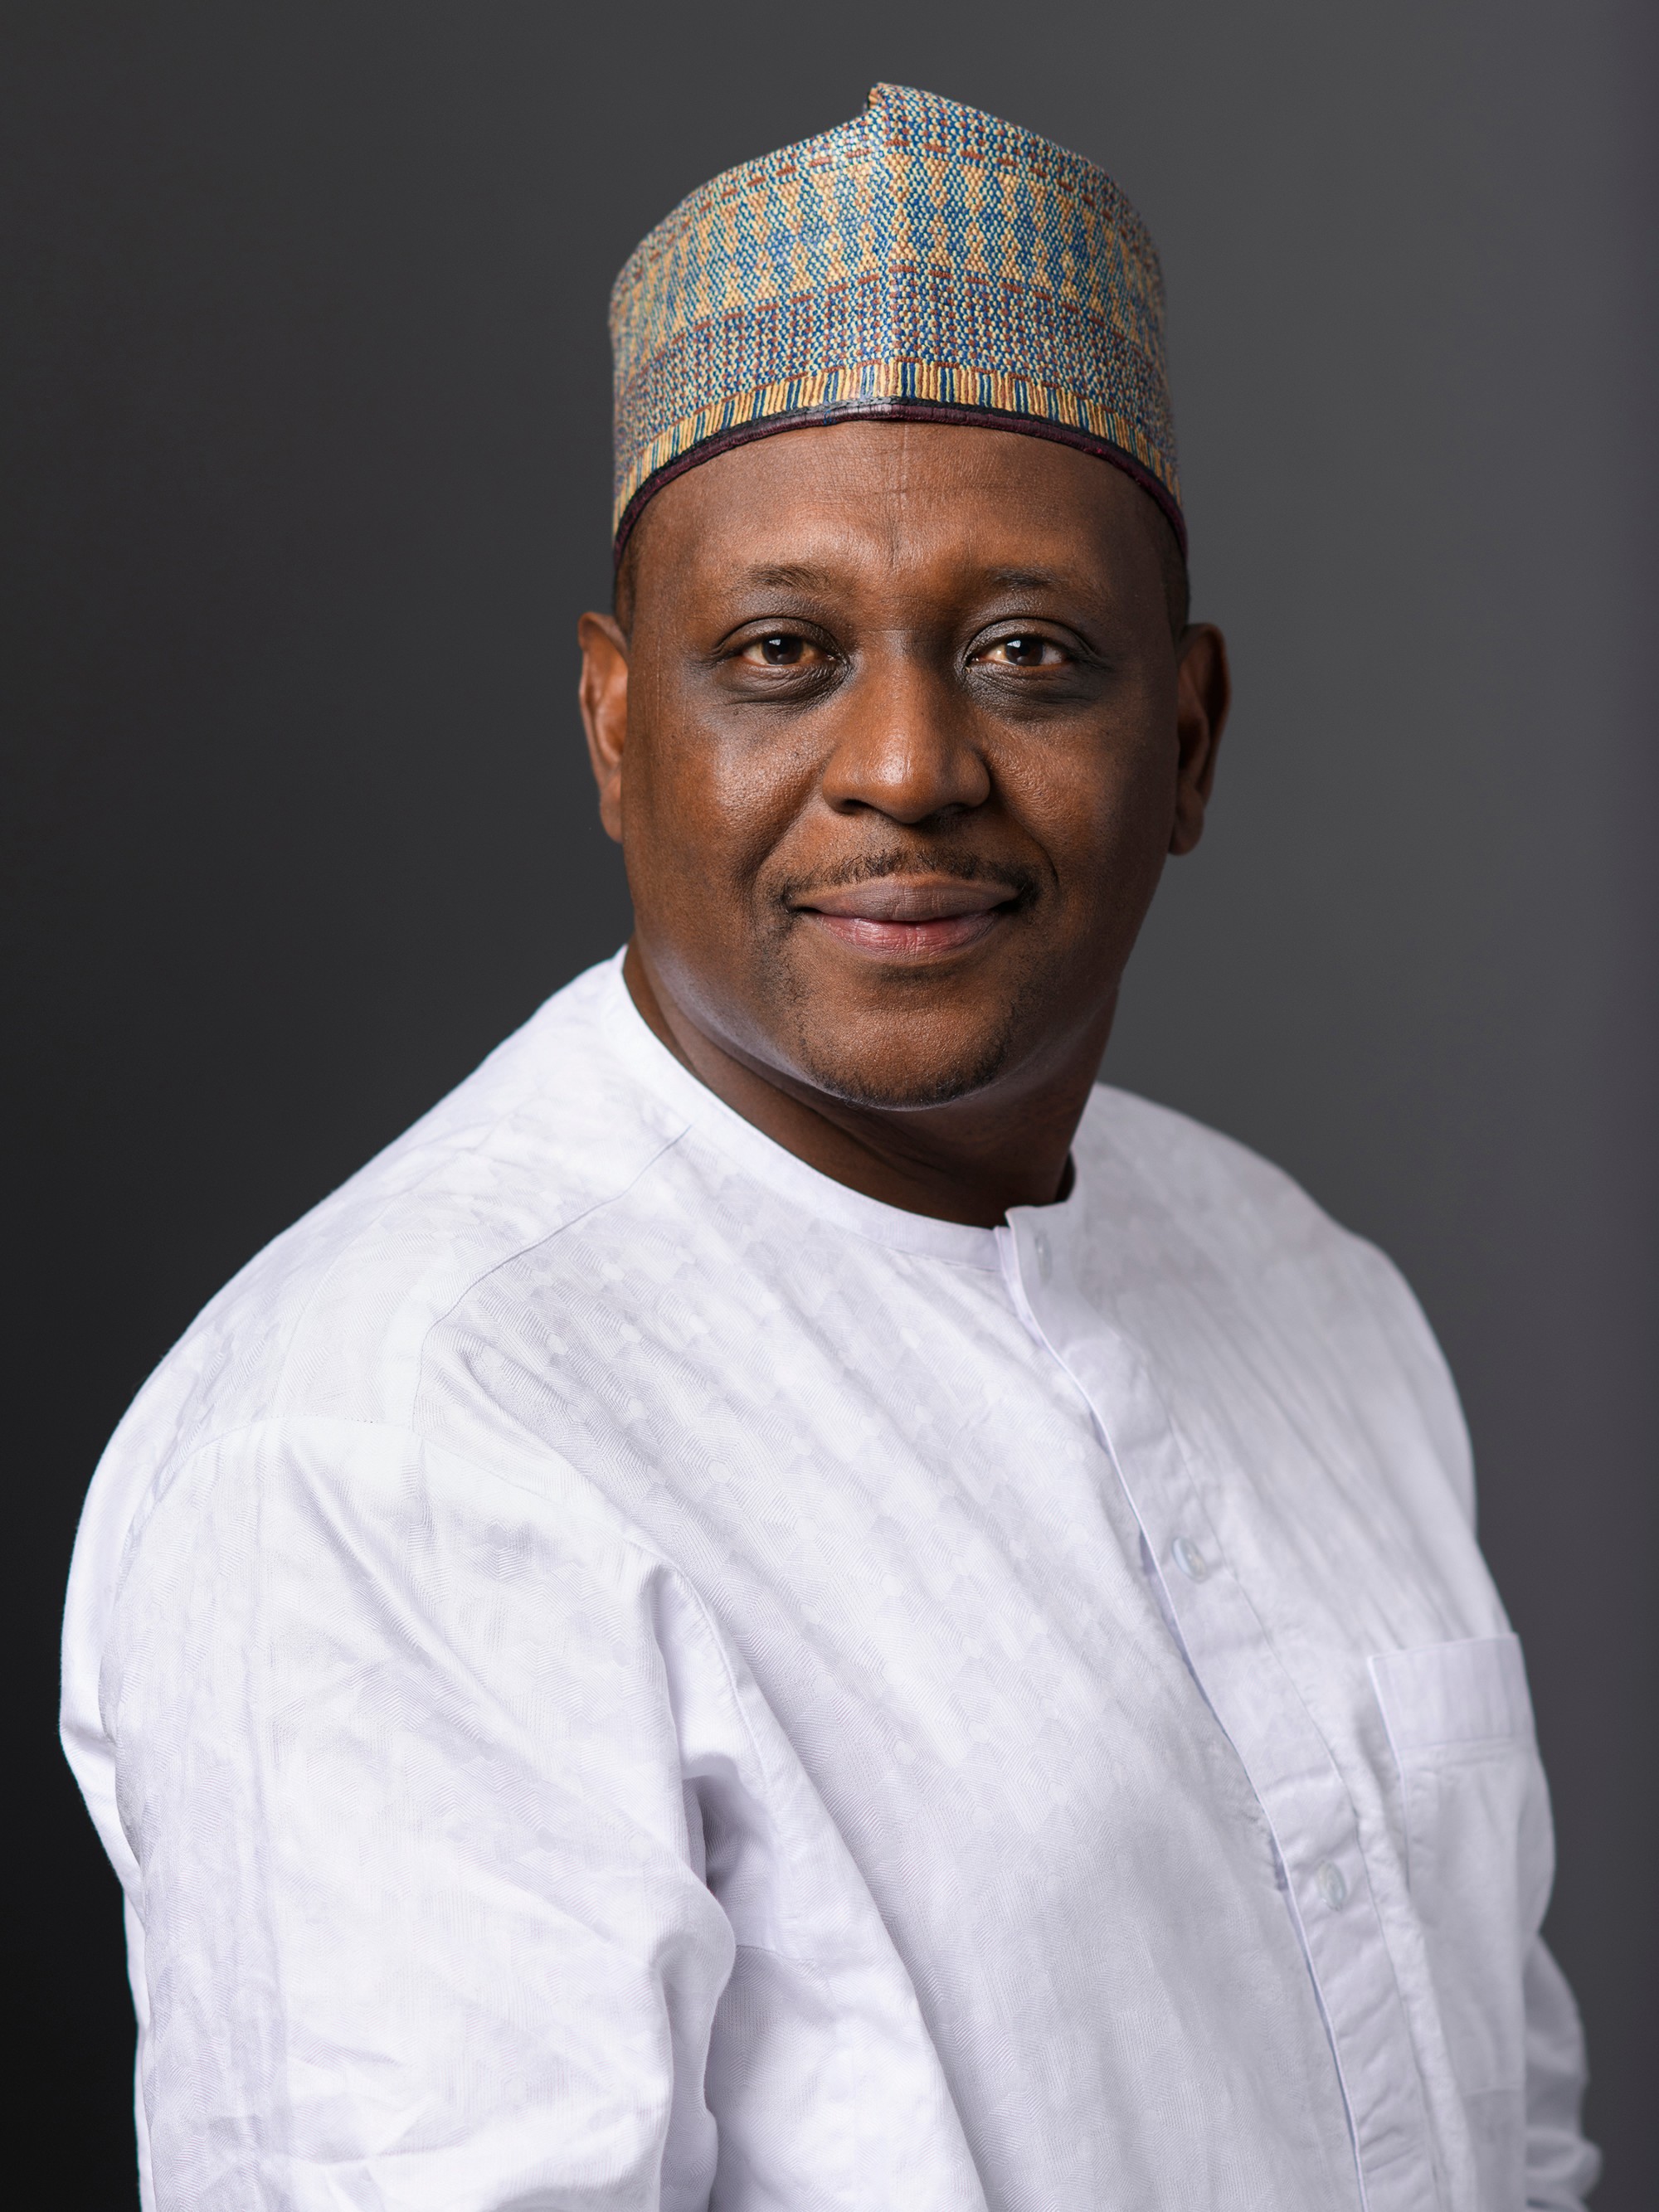 Dr. Muhammad Pate, Minister of Health, Nigeria 